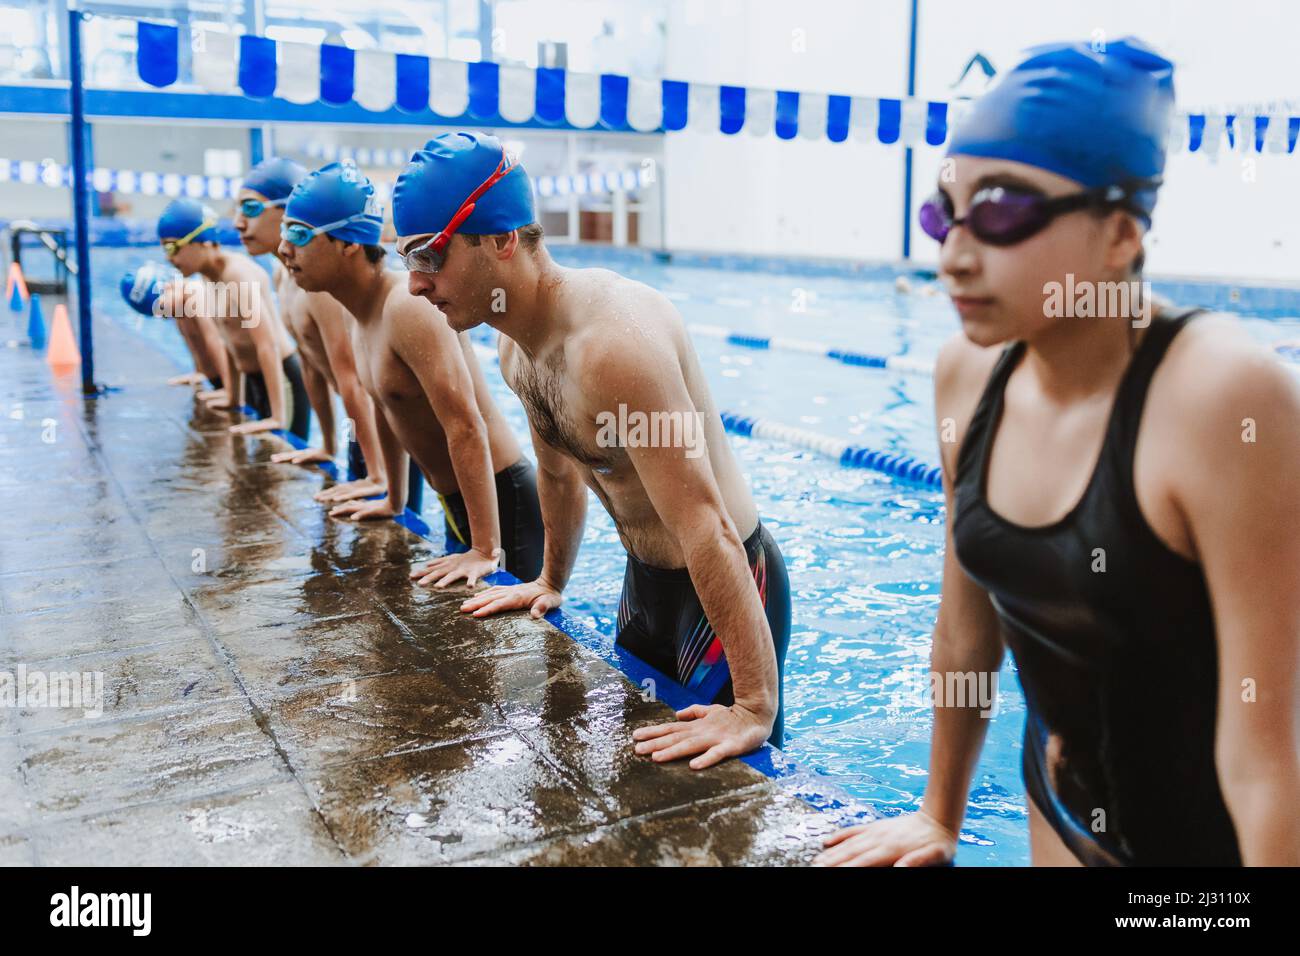 latin child boy swimmer wearing cap and goggles in a swimming training at the Pool in Mexico Latin America Stock Photo